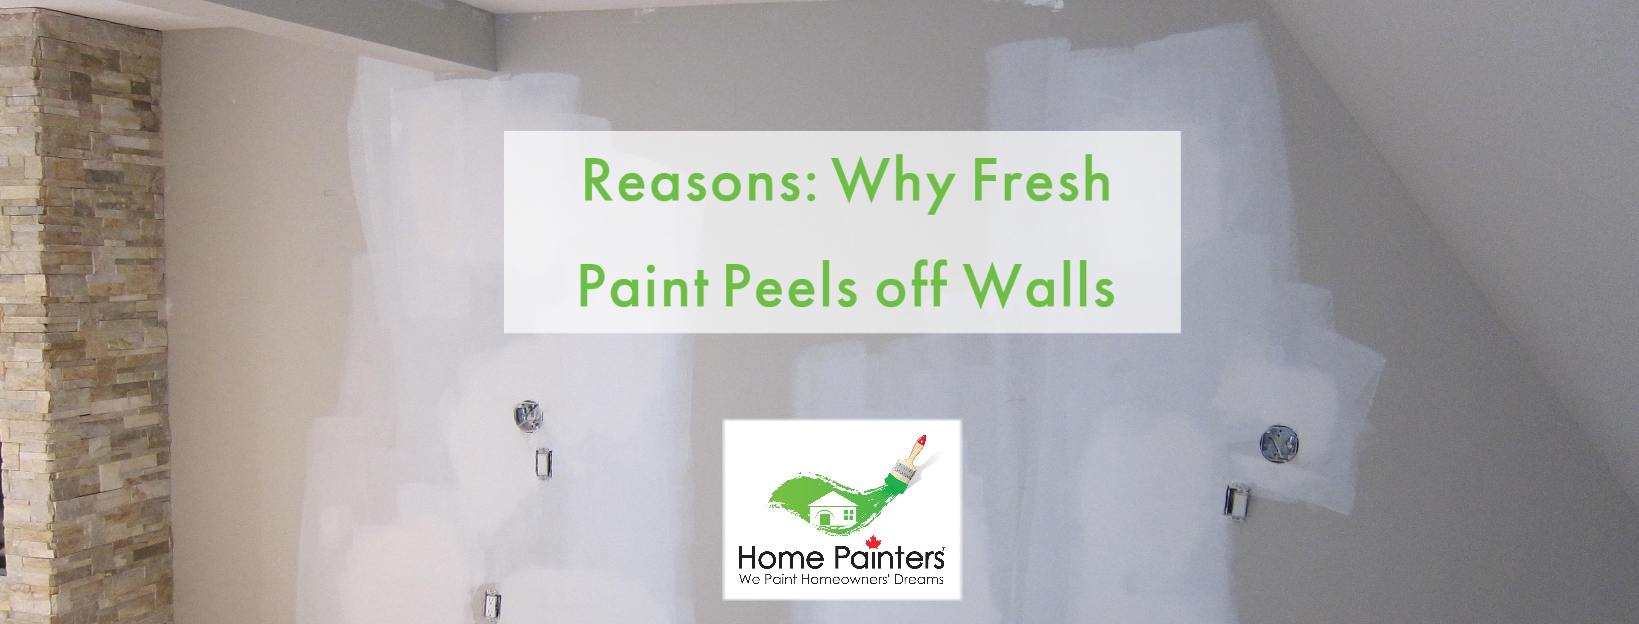 home painters - paint peels of wall